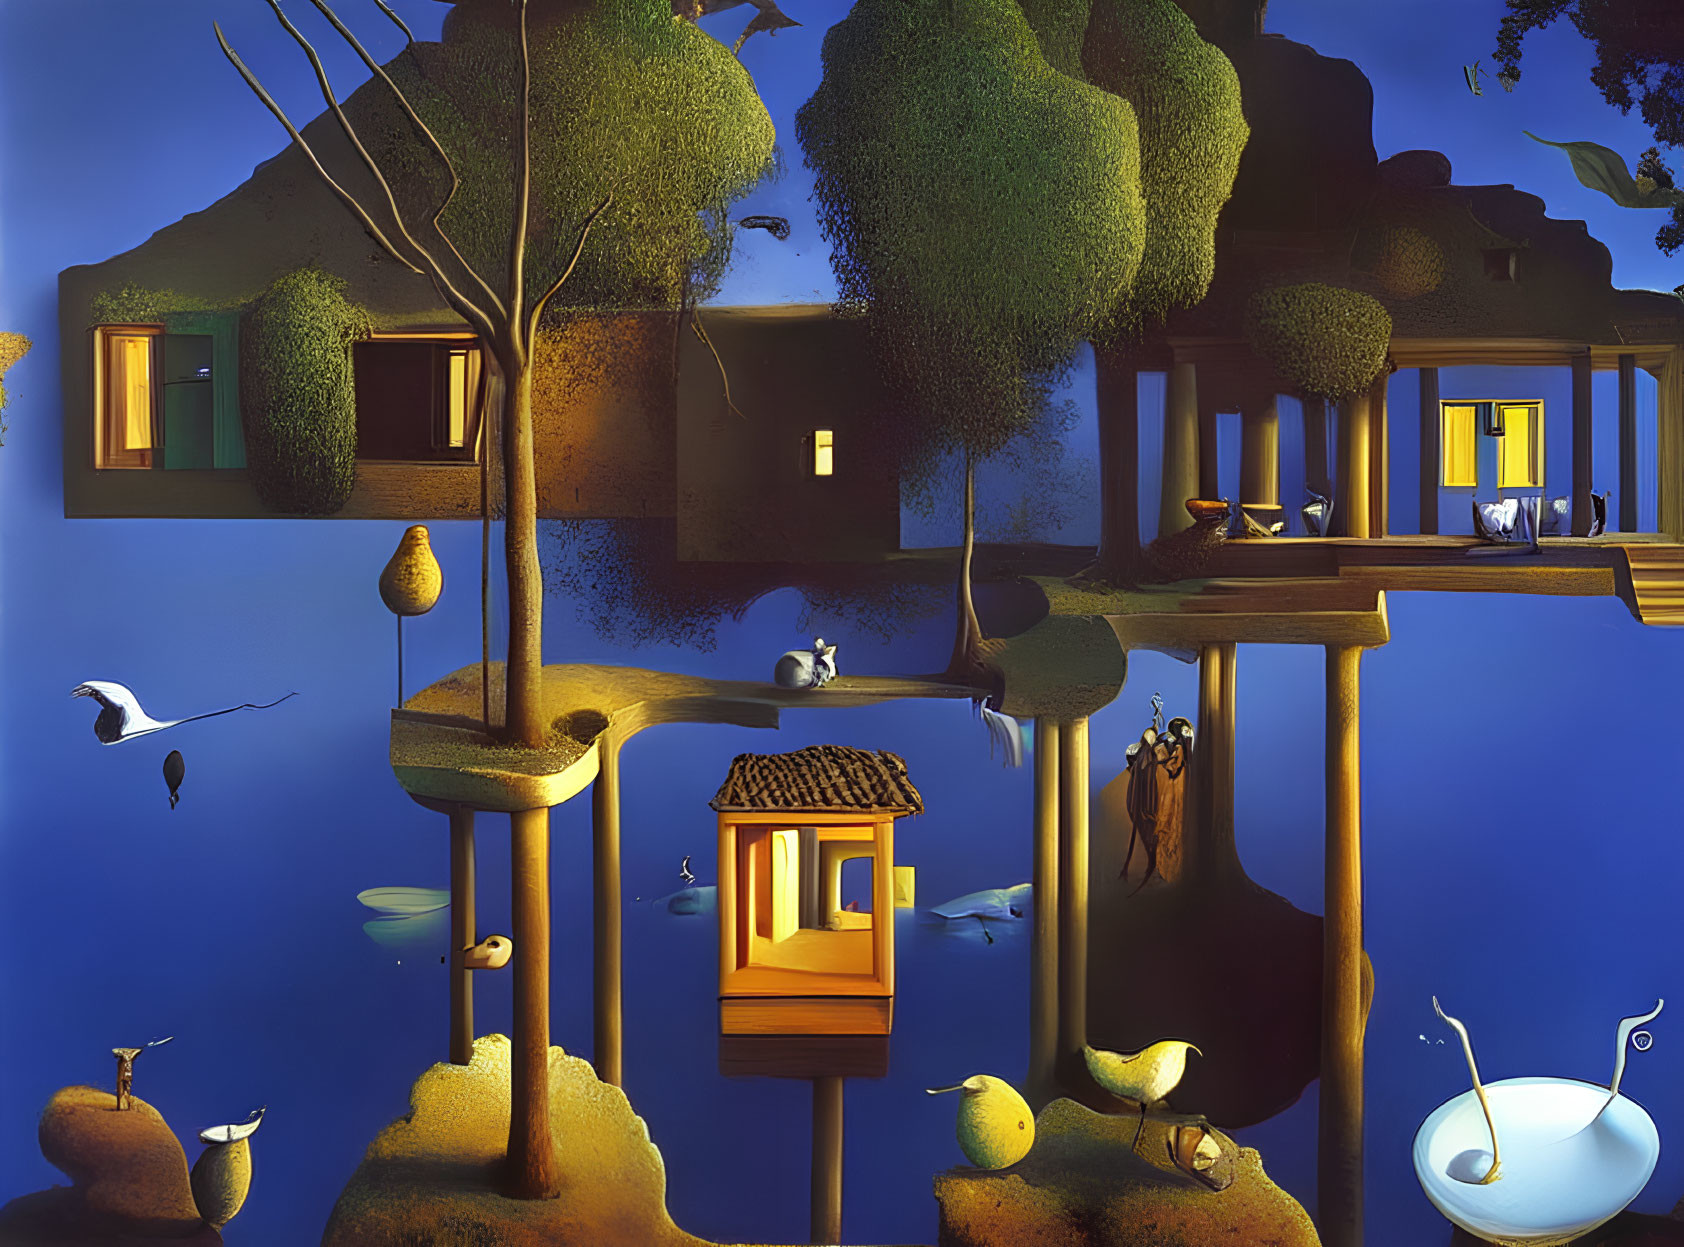 Surreal nighttime landscape with tree houses, birds, fish, and overflowing cup